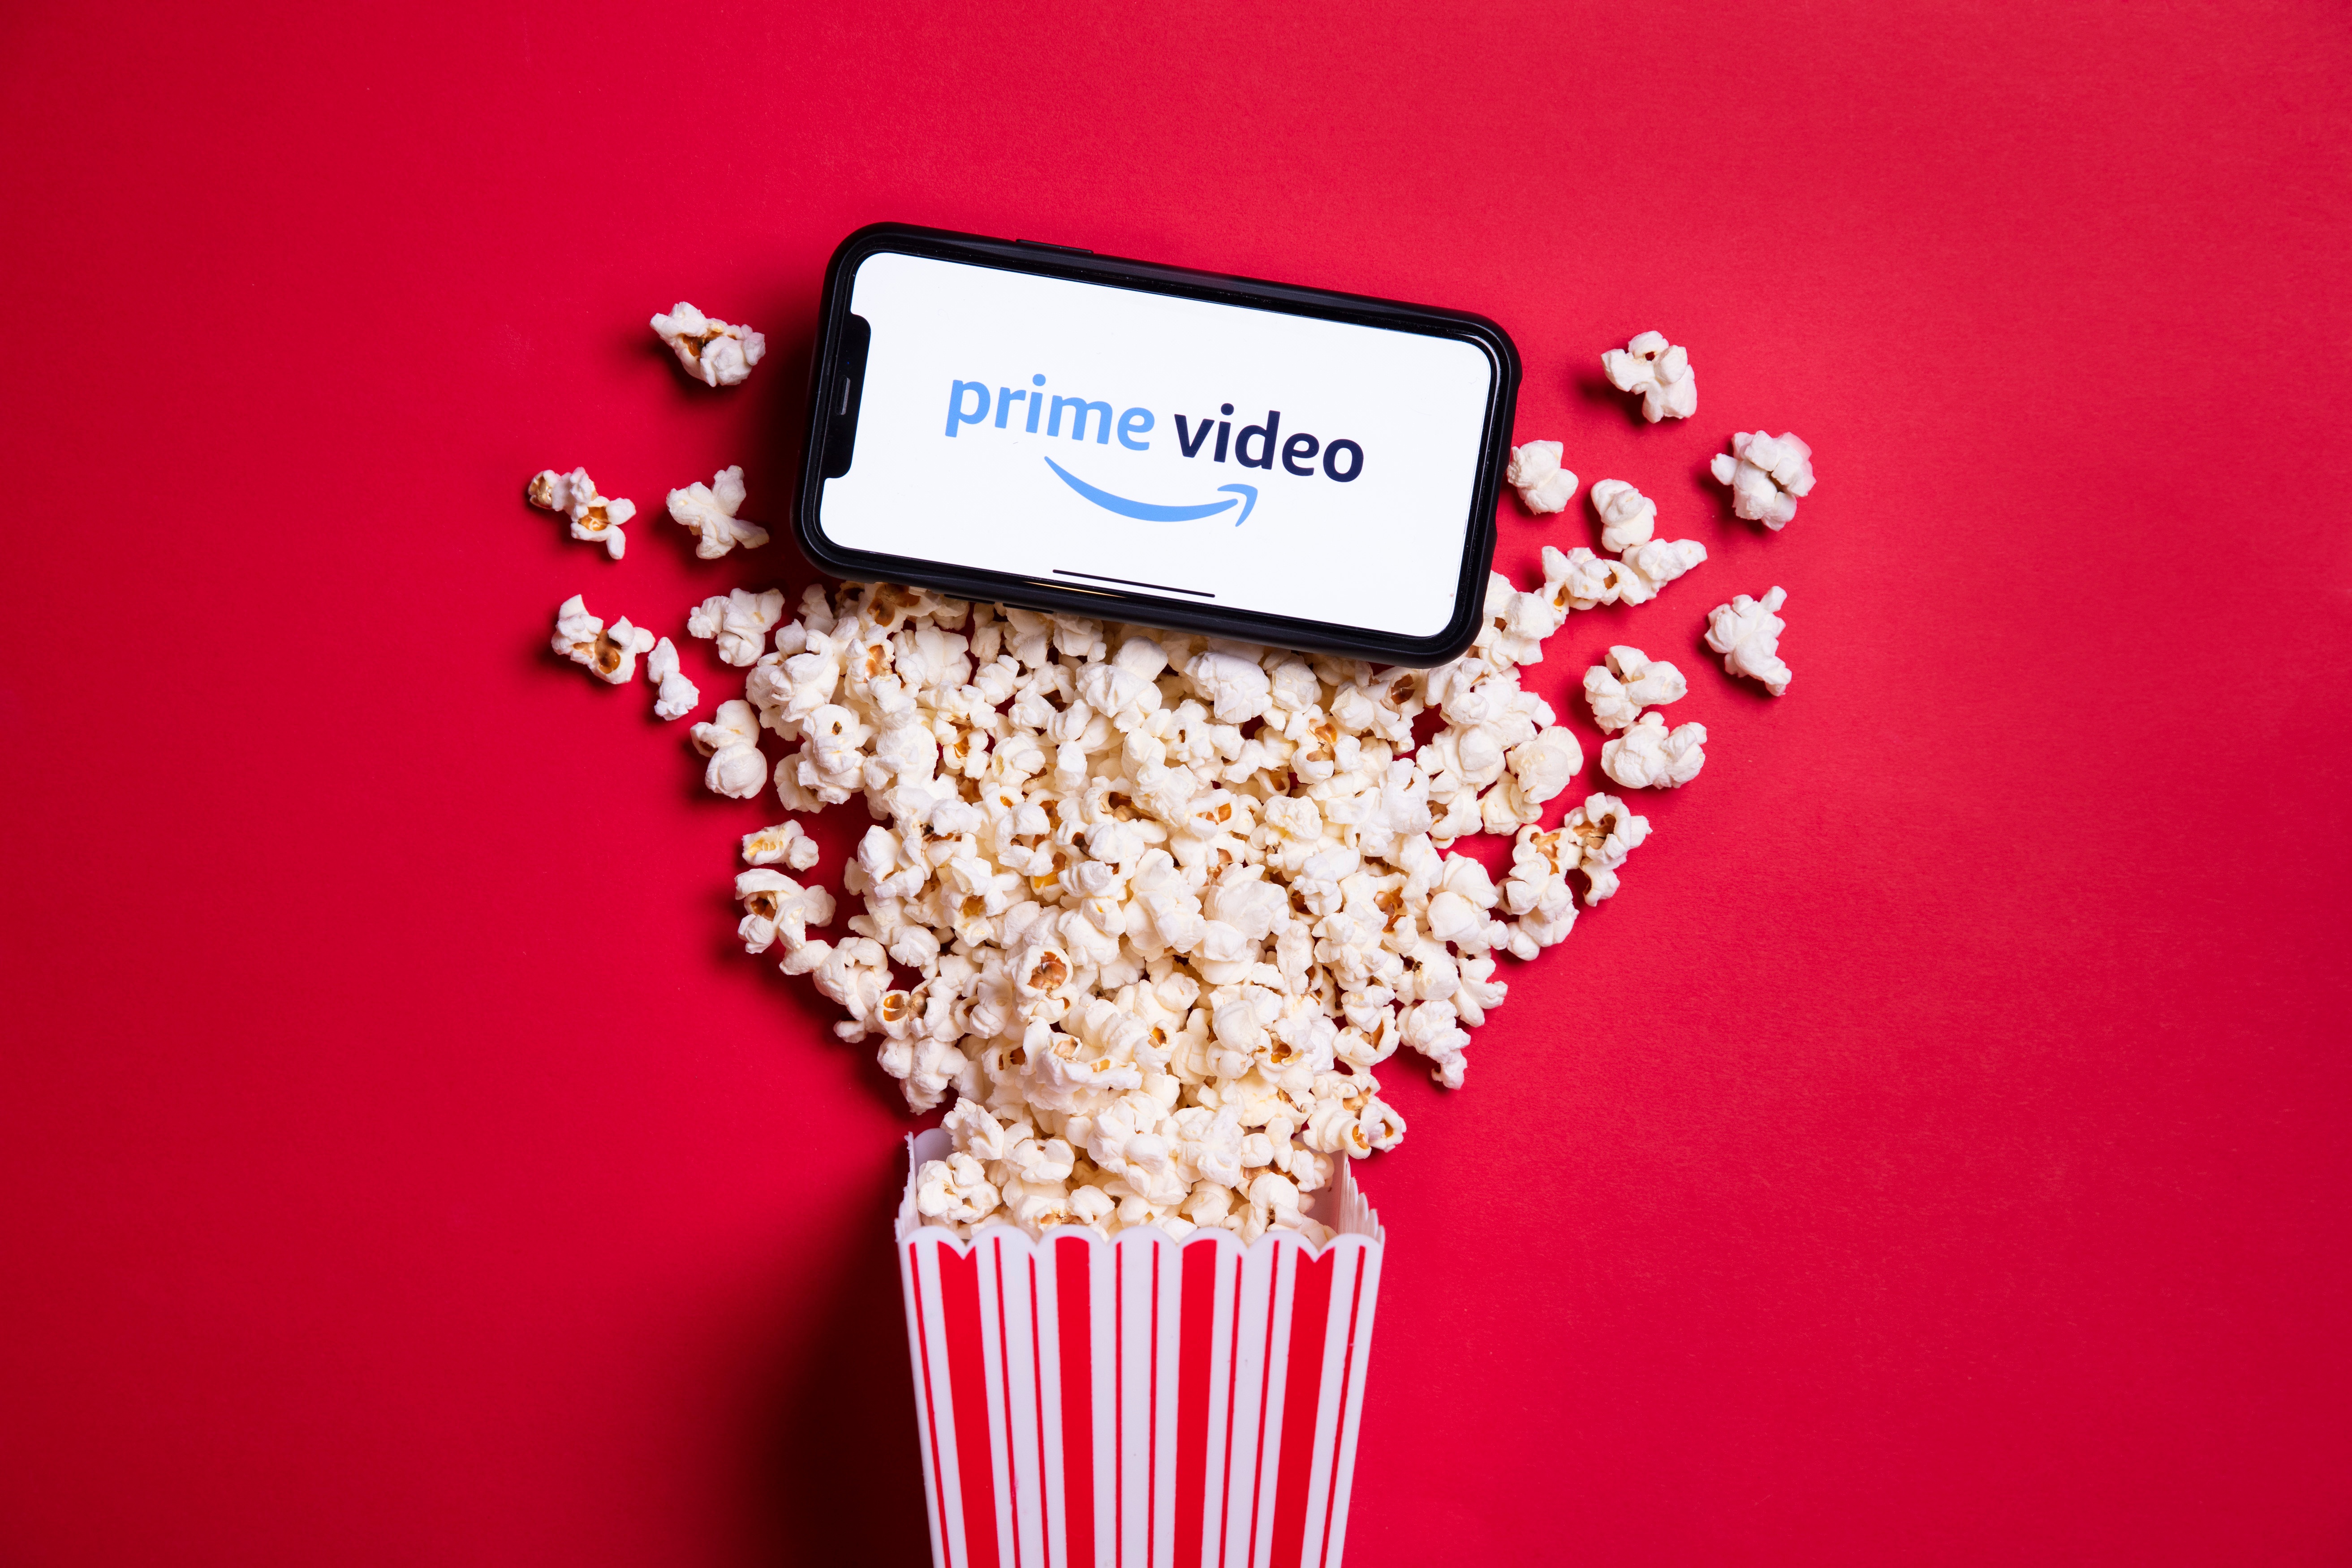 Here’s What’s Coming to Amazon Prime Video in June 2021